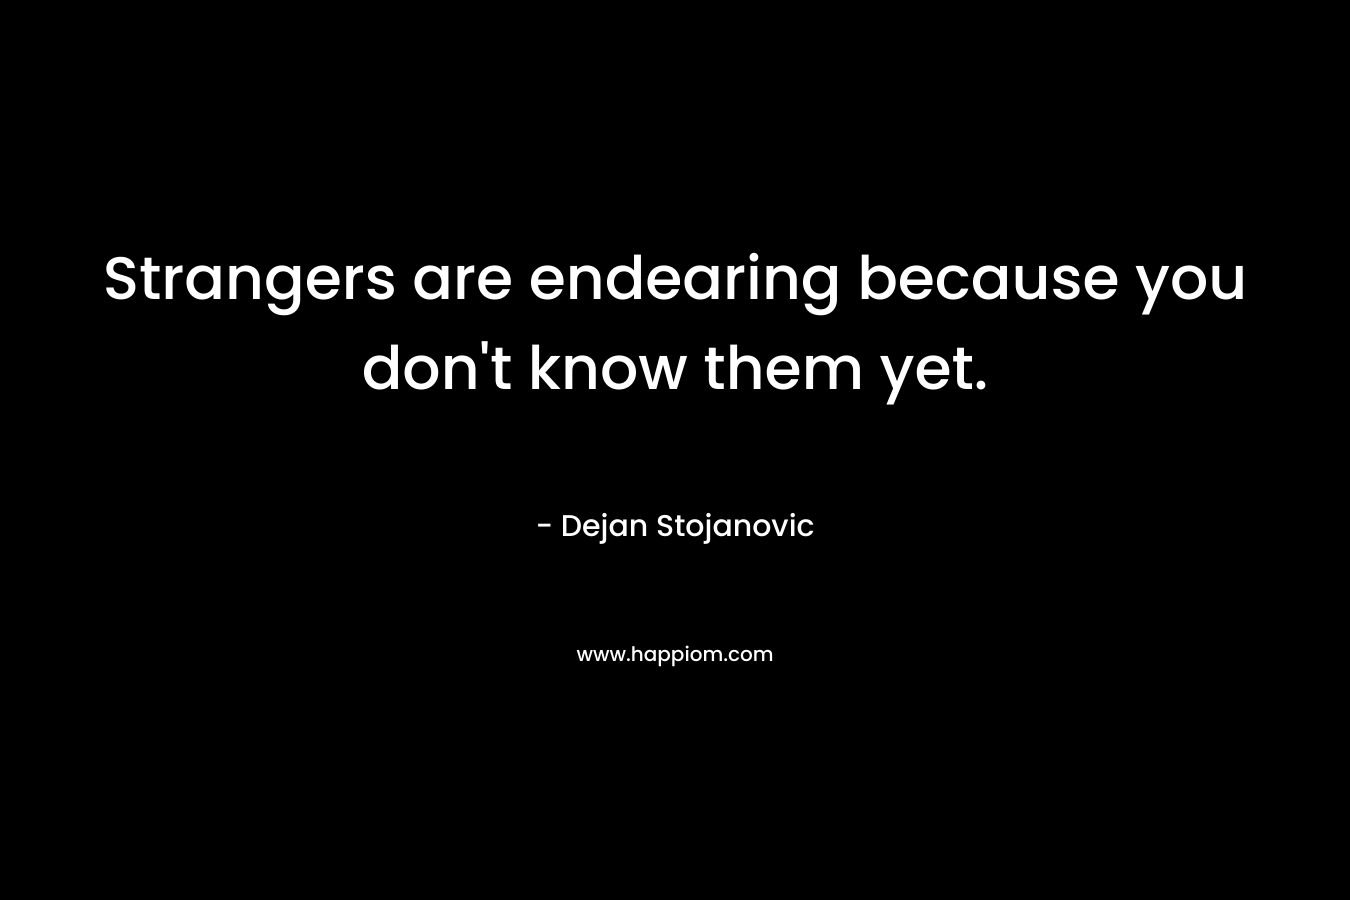 Strangers are endearing because you don’t know them yet. – Dejan Stojanovic